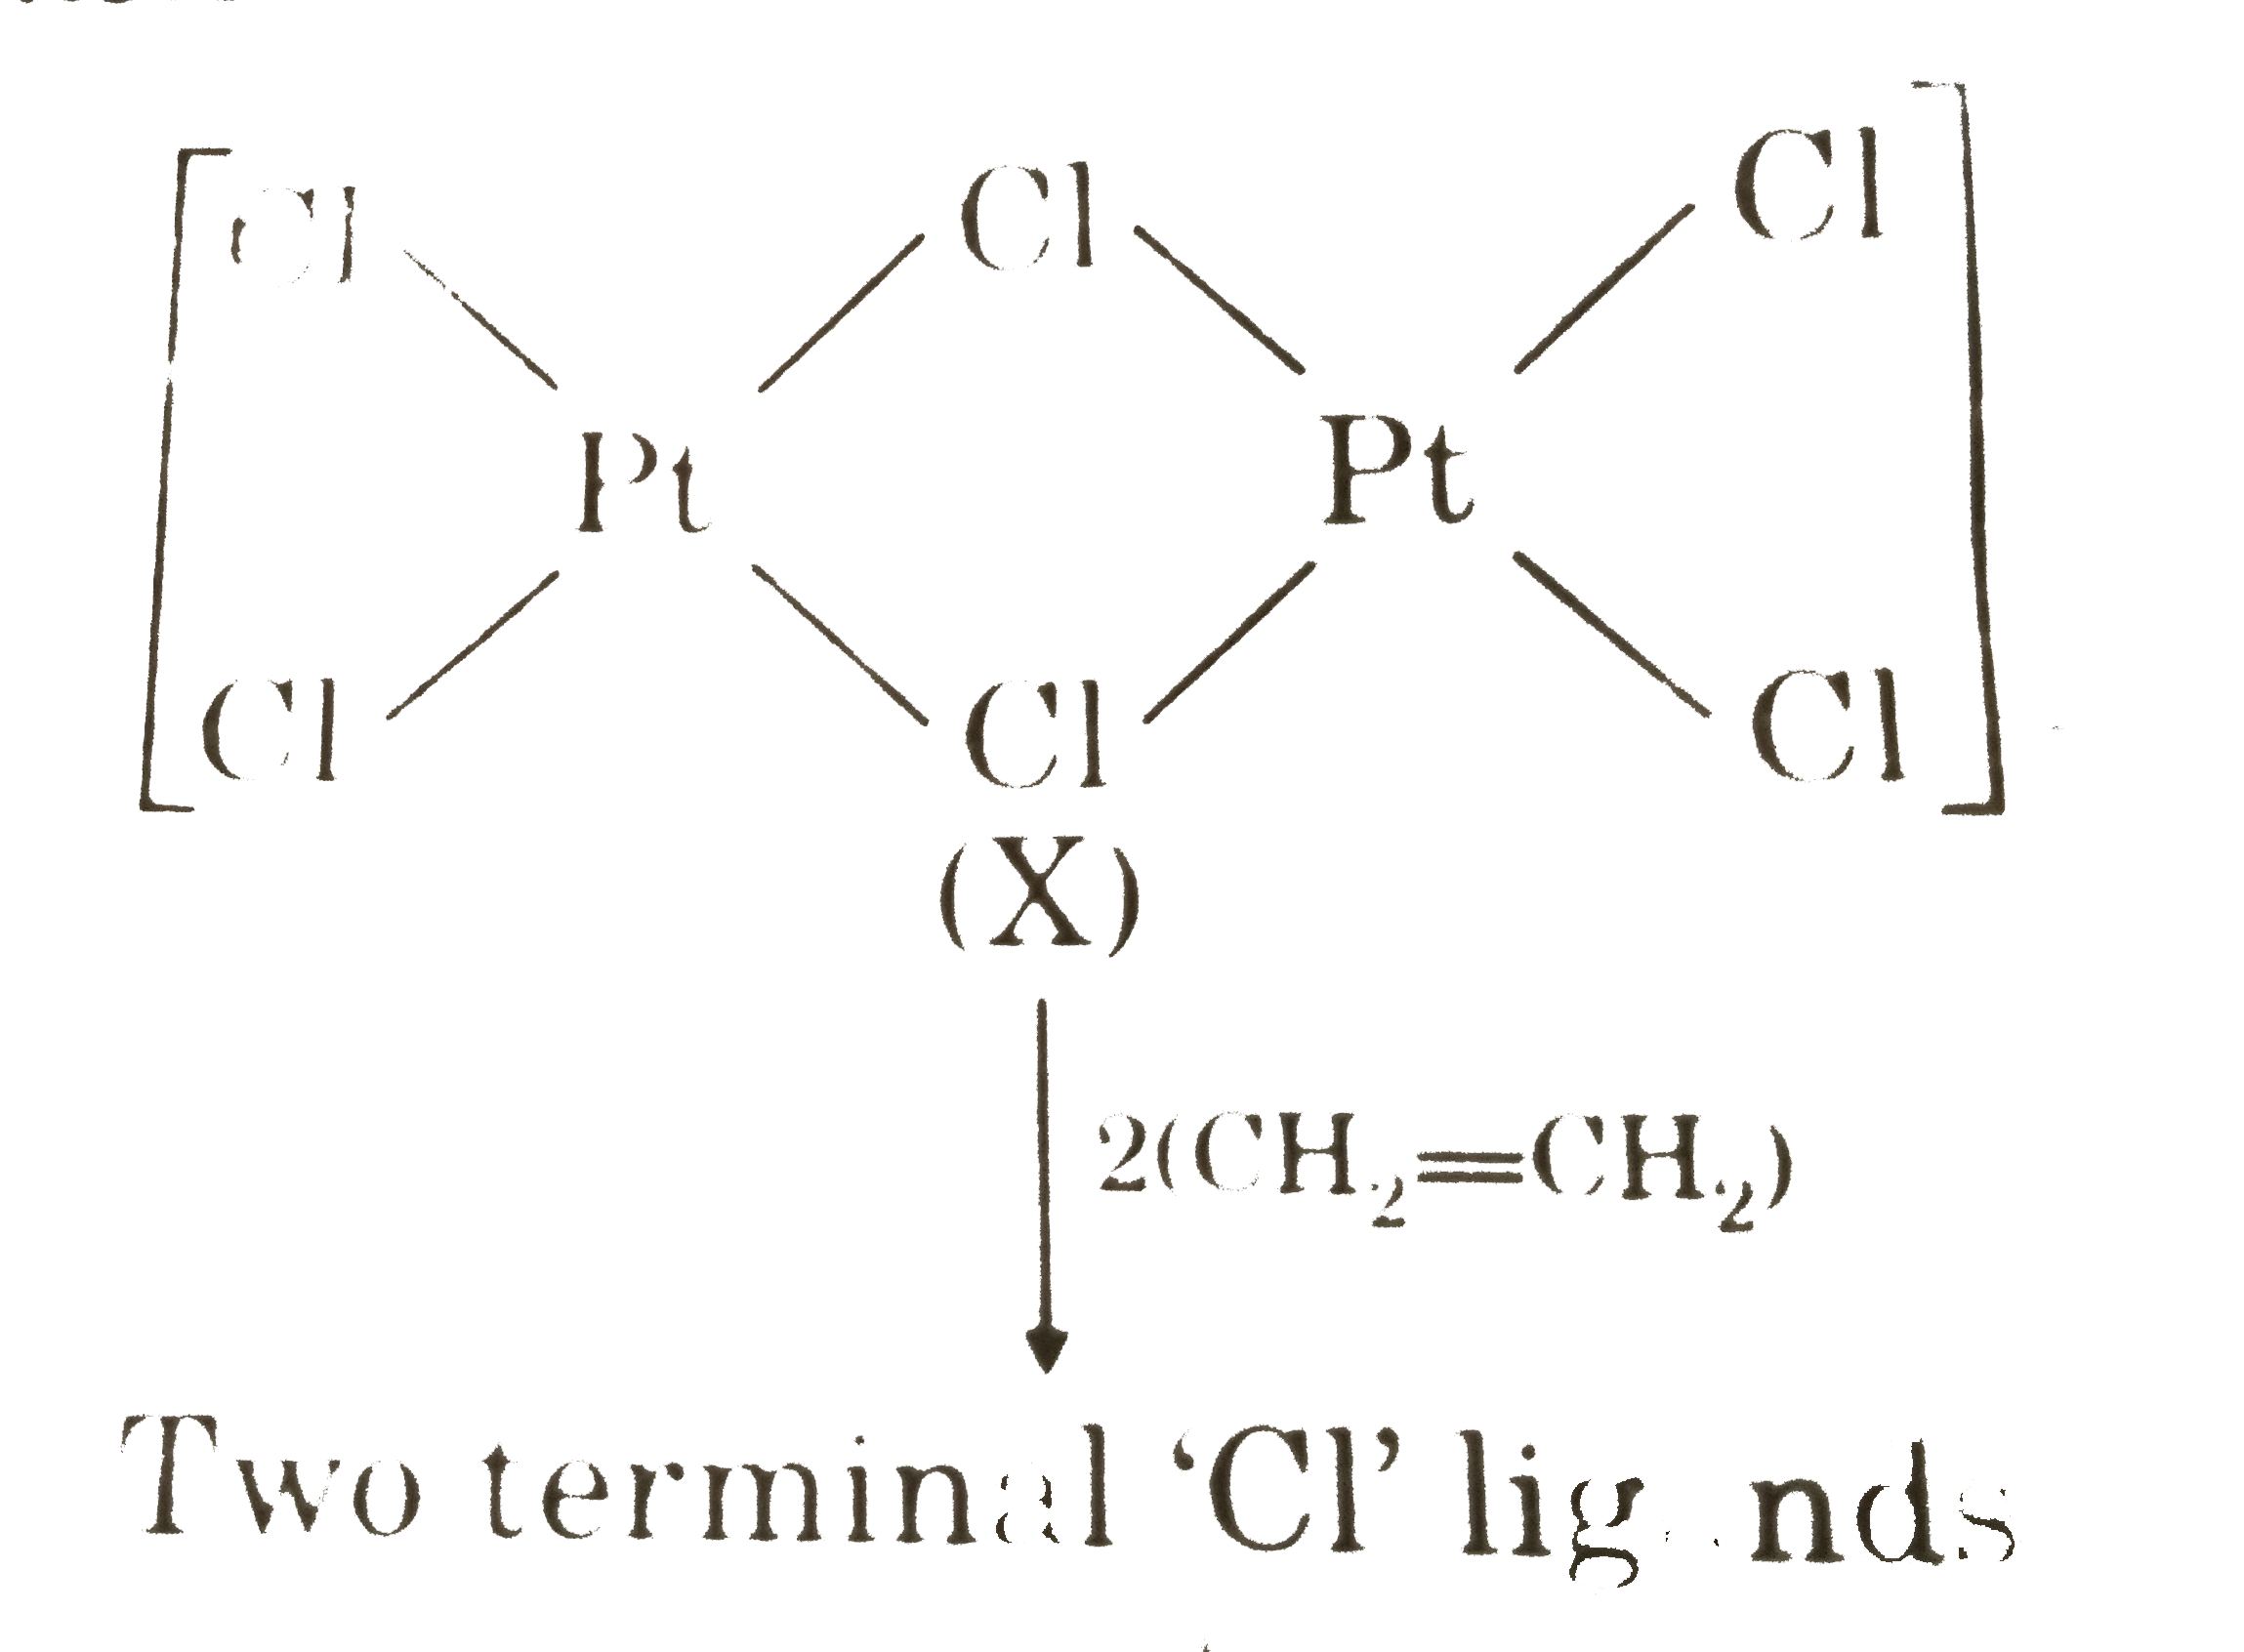 Both (X) and (Y) are square planar complexes about Pt^(II)   Which of the following isomerism(s) is/are exhibited by the complex (Y)?